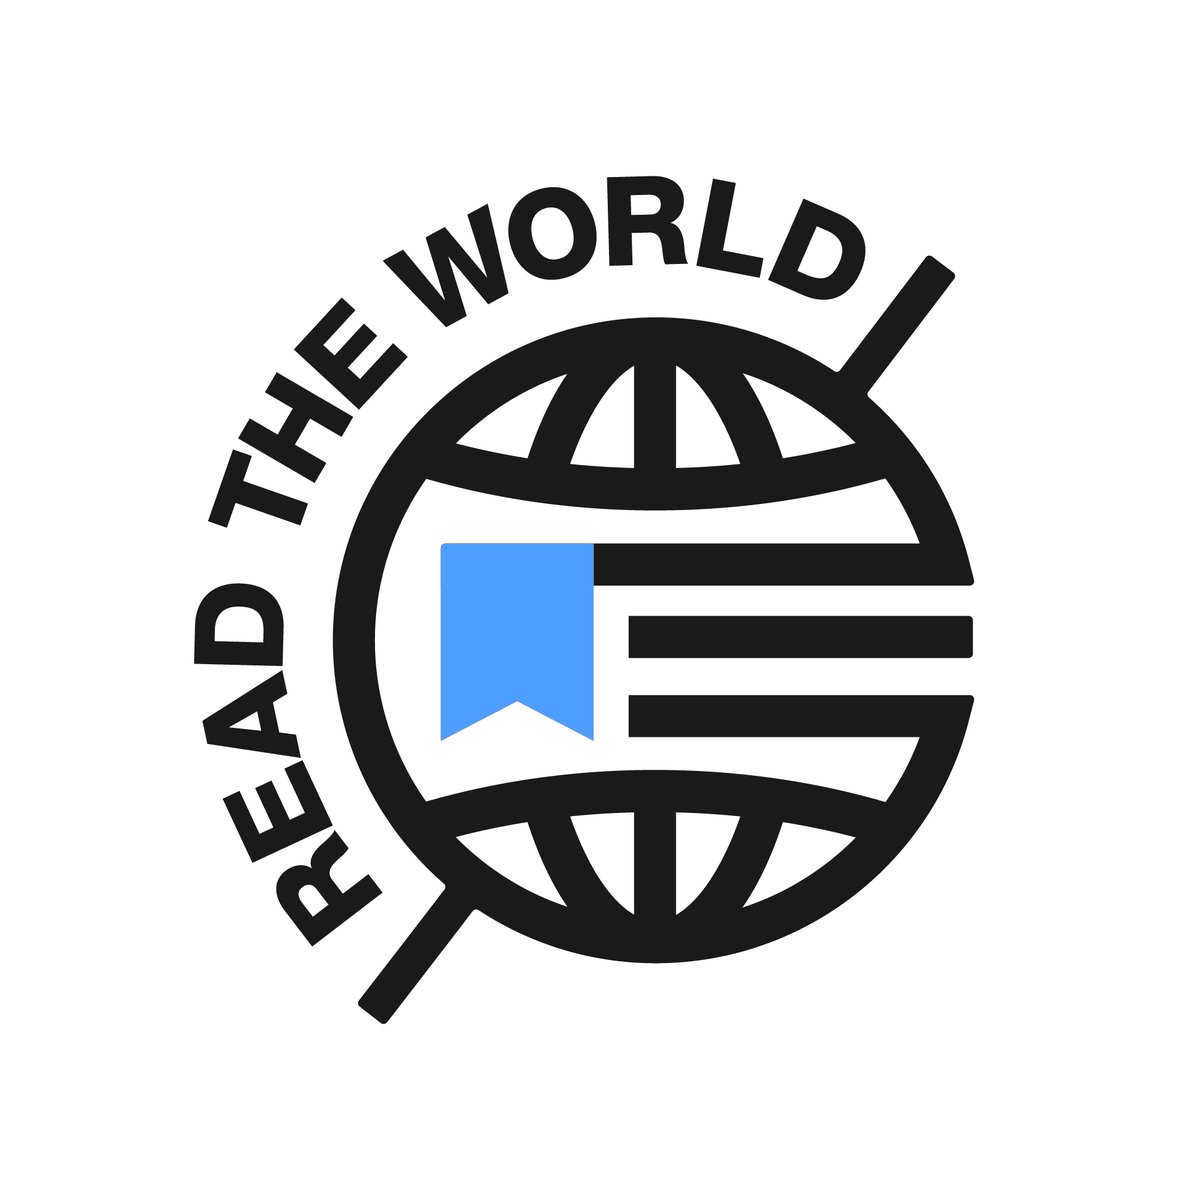 To celebrate #ReadTheWorld, @LitTranslate’s online bookfair celebrating translation, please share a translation you’ve recently read that you’d recommend to others.